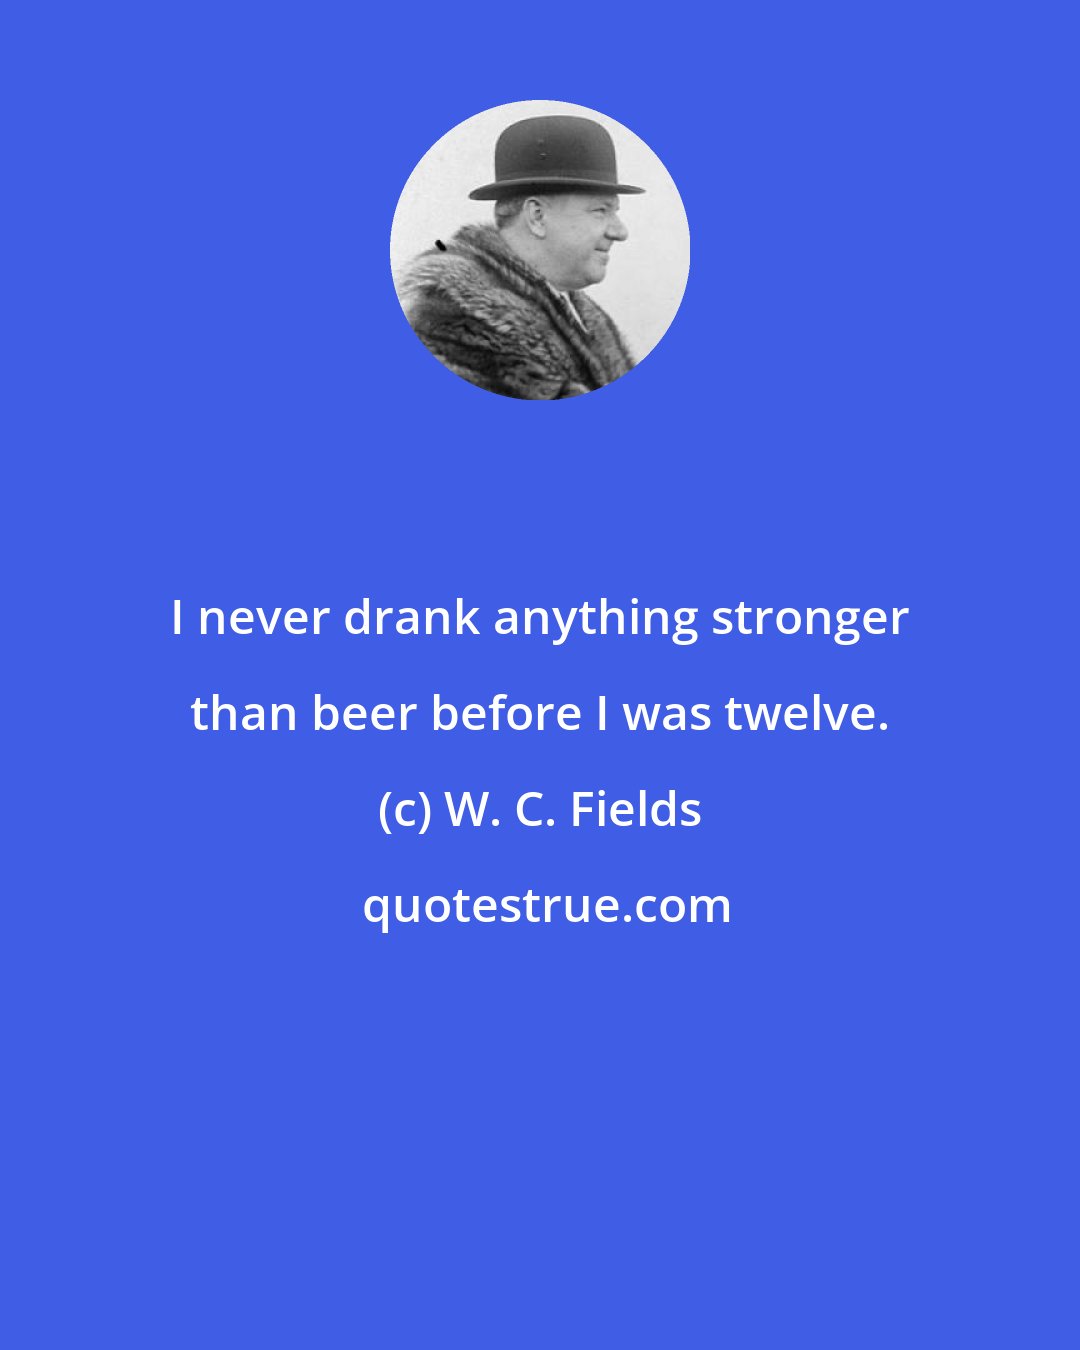 W. C. Fields: I never drank anything stronger than beer before I was twelve.